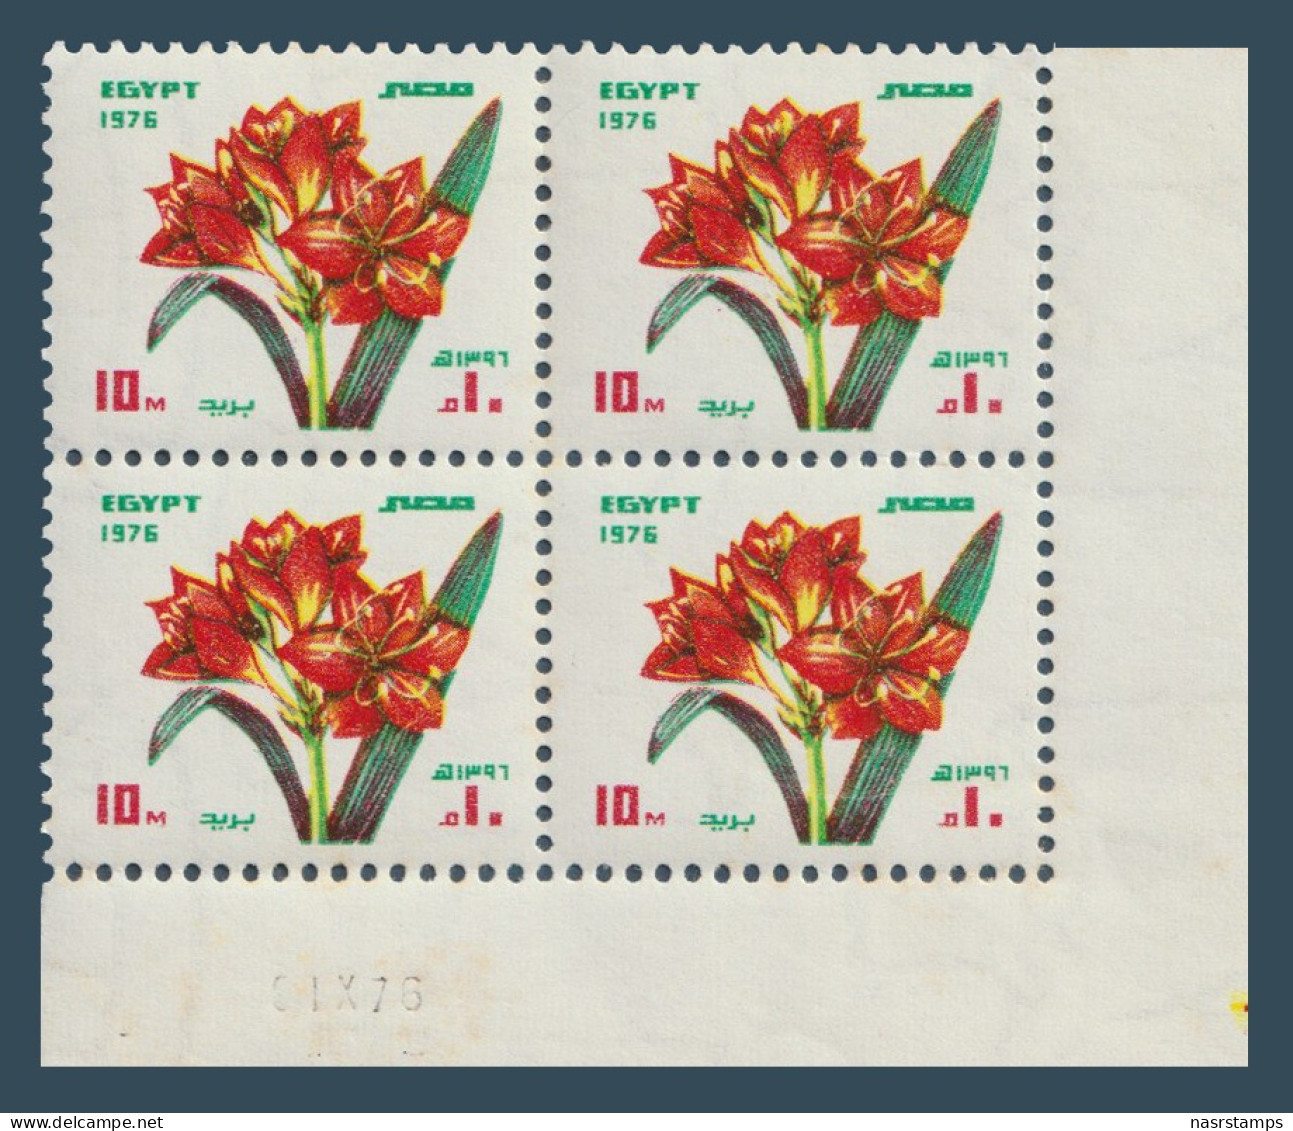 Egypt - 1976 - ( Flowers - Scarborough Lily - For Use On Greeting Cards ) - MNH (**) - Ongebruikt